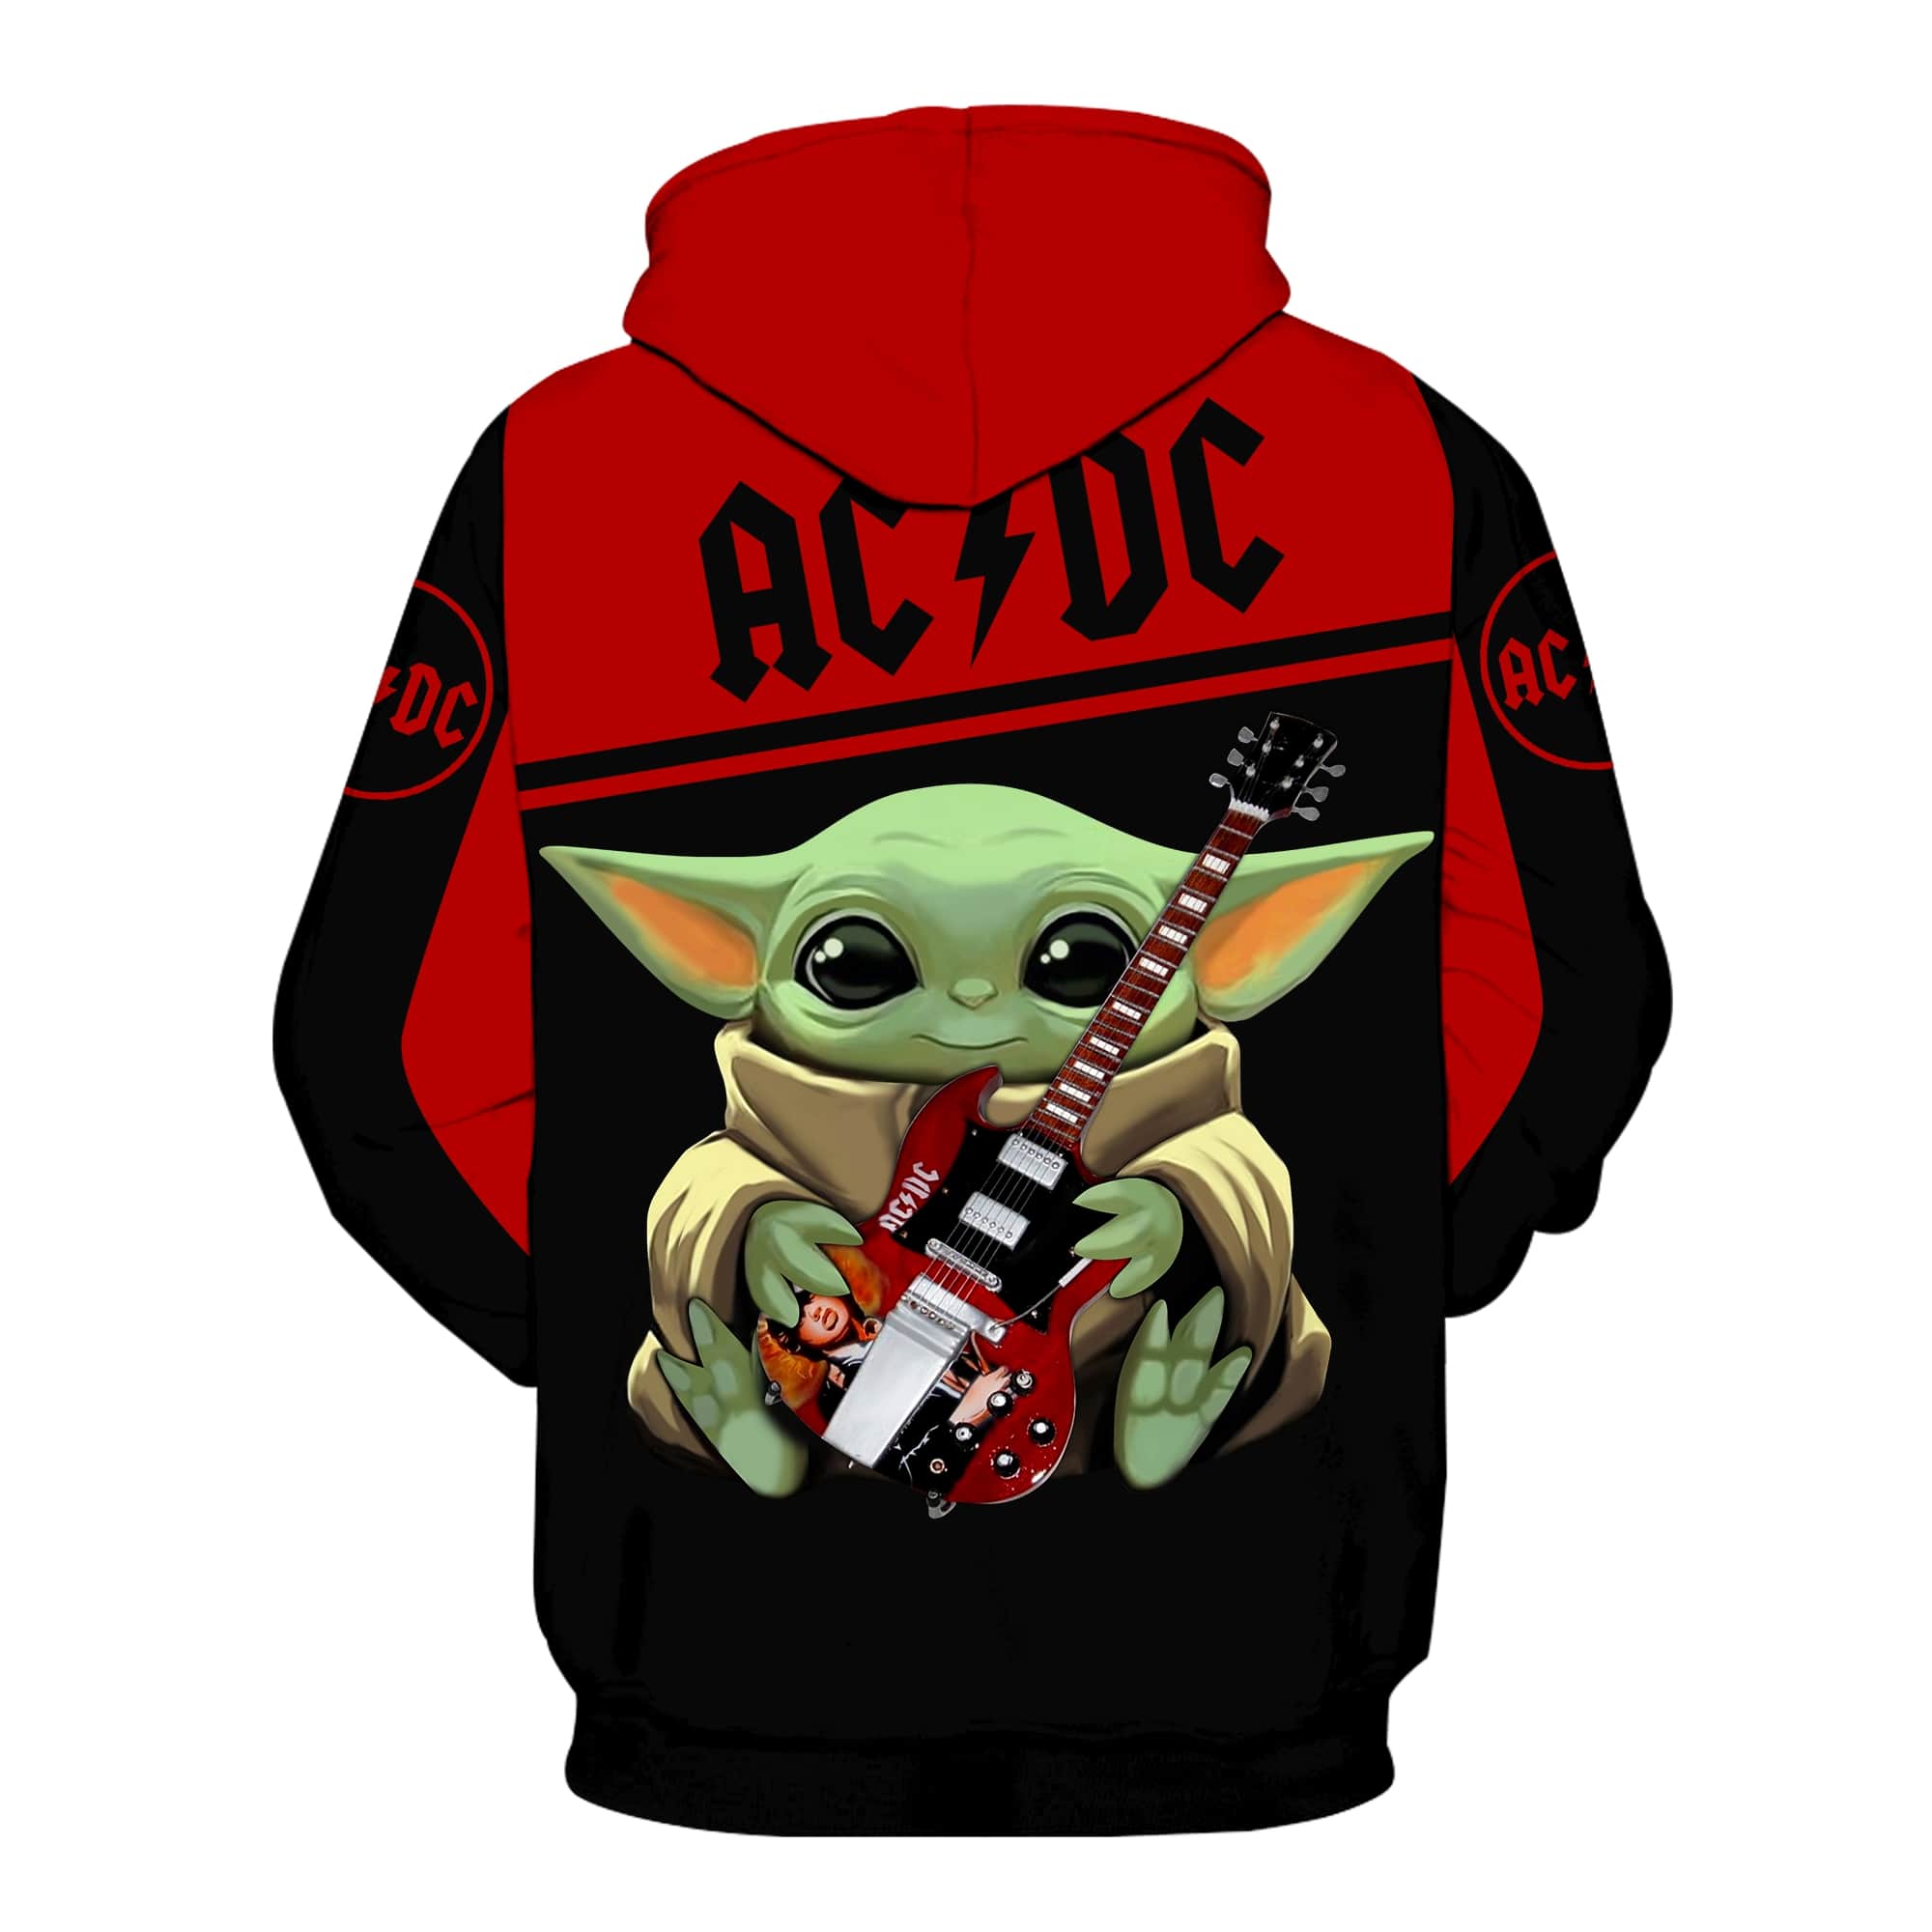 ACDC baby yoda all over print hoodie - back